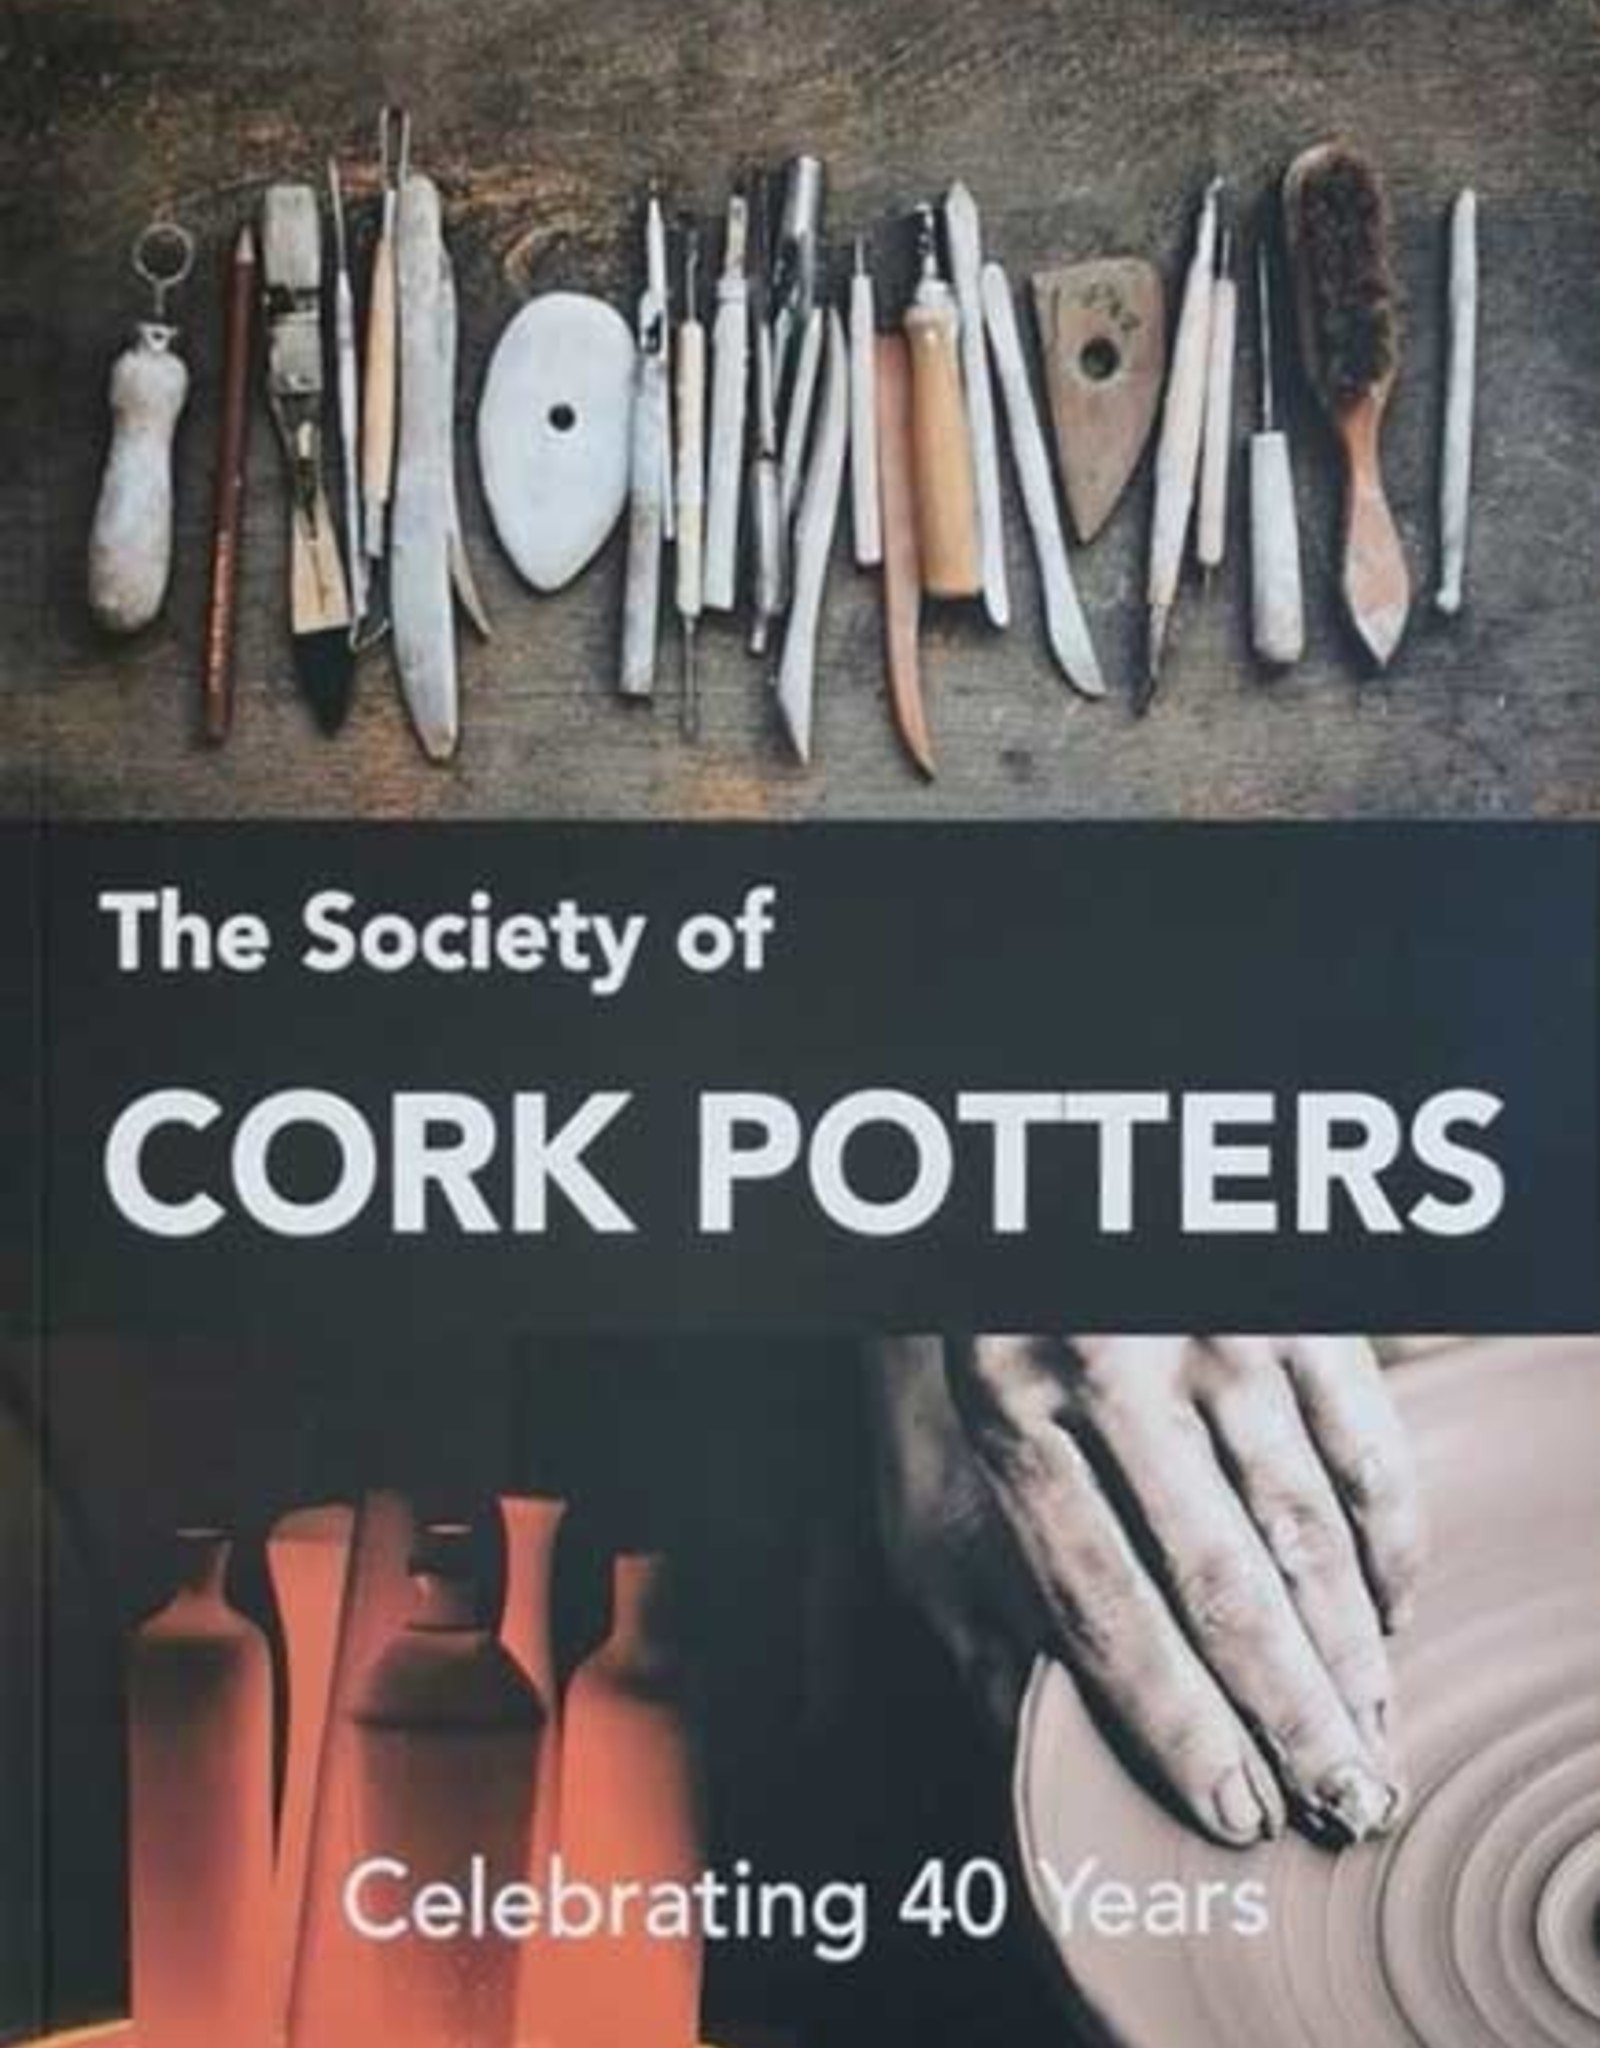 The Society of Cork Potters - Celebrating 40 Years